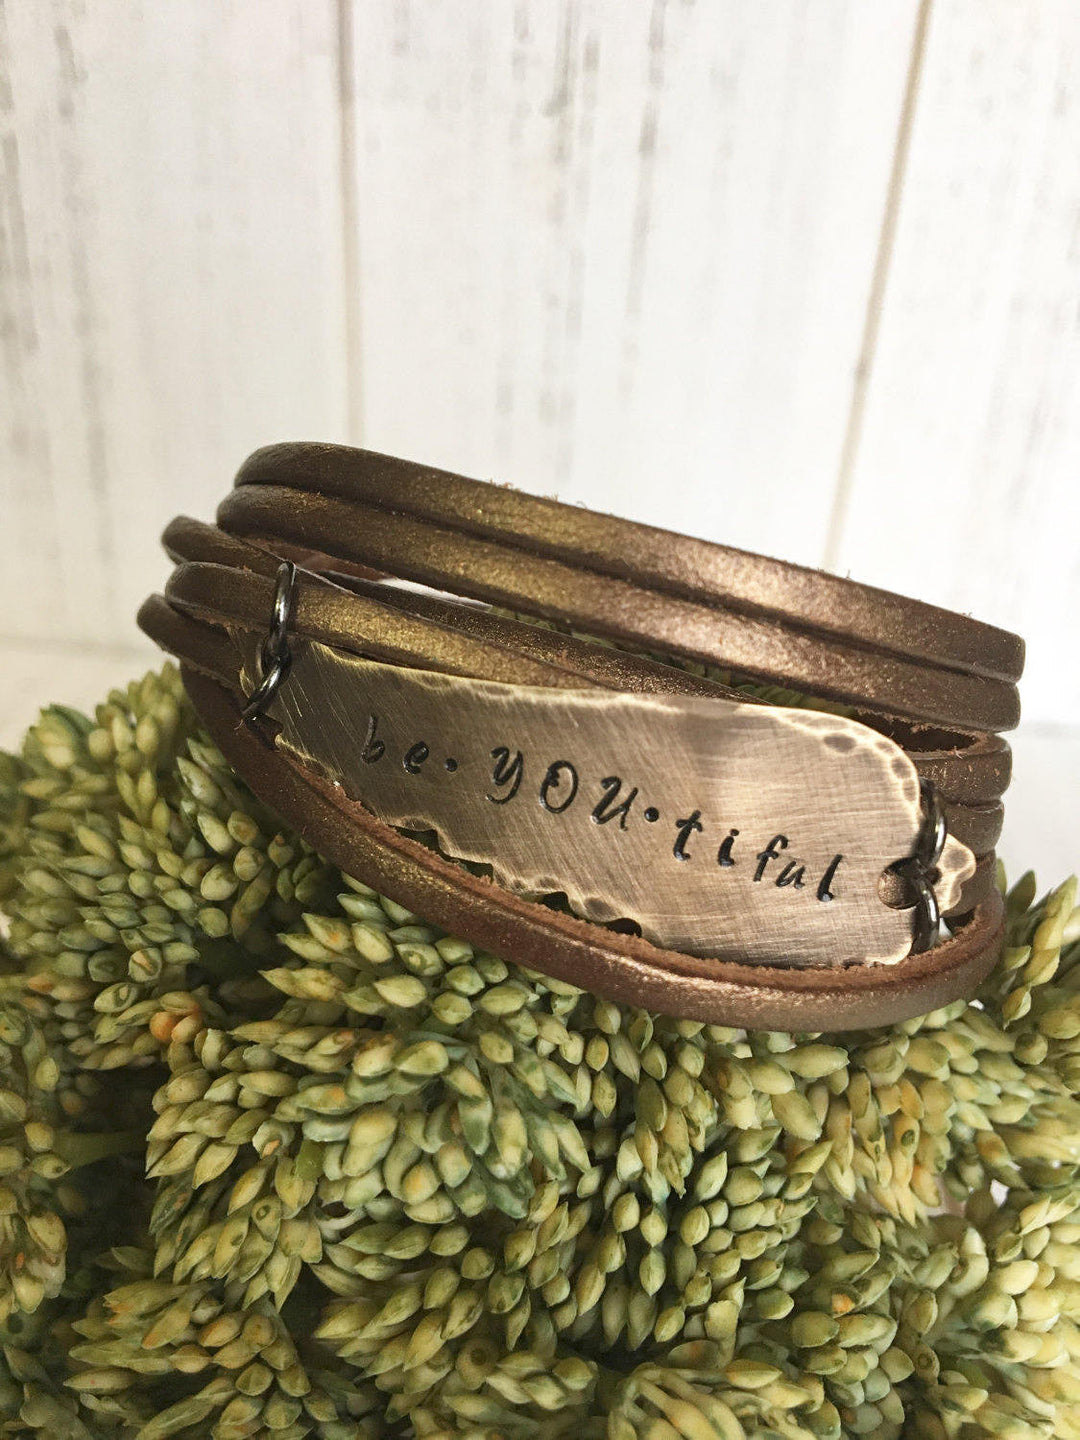 Let it Be Bronze Leather & Angel Wing Wrap Bracelet, adjustable Leather Wrap Create Hope Cuffs 